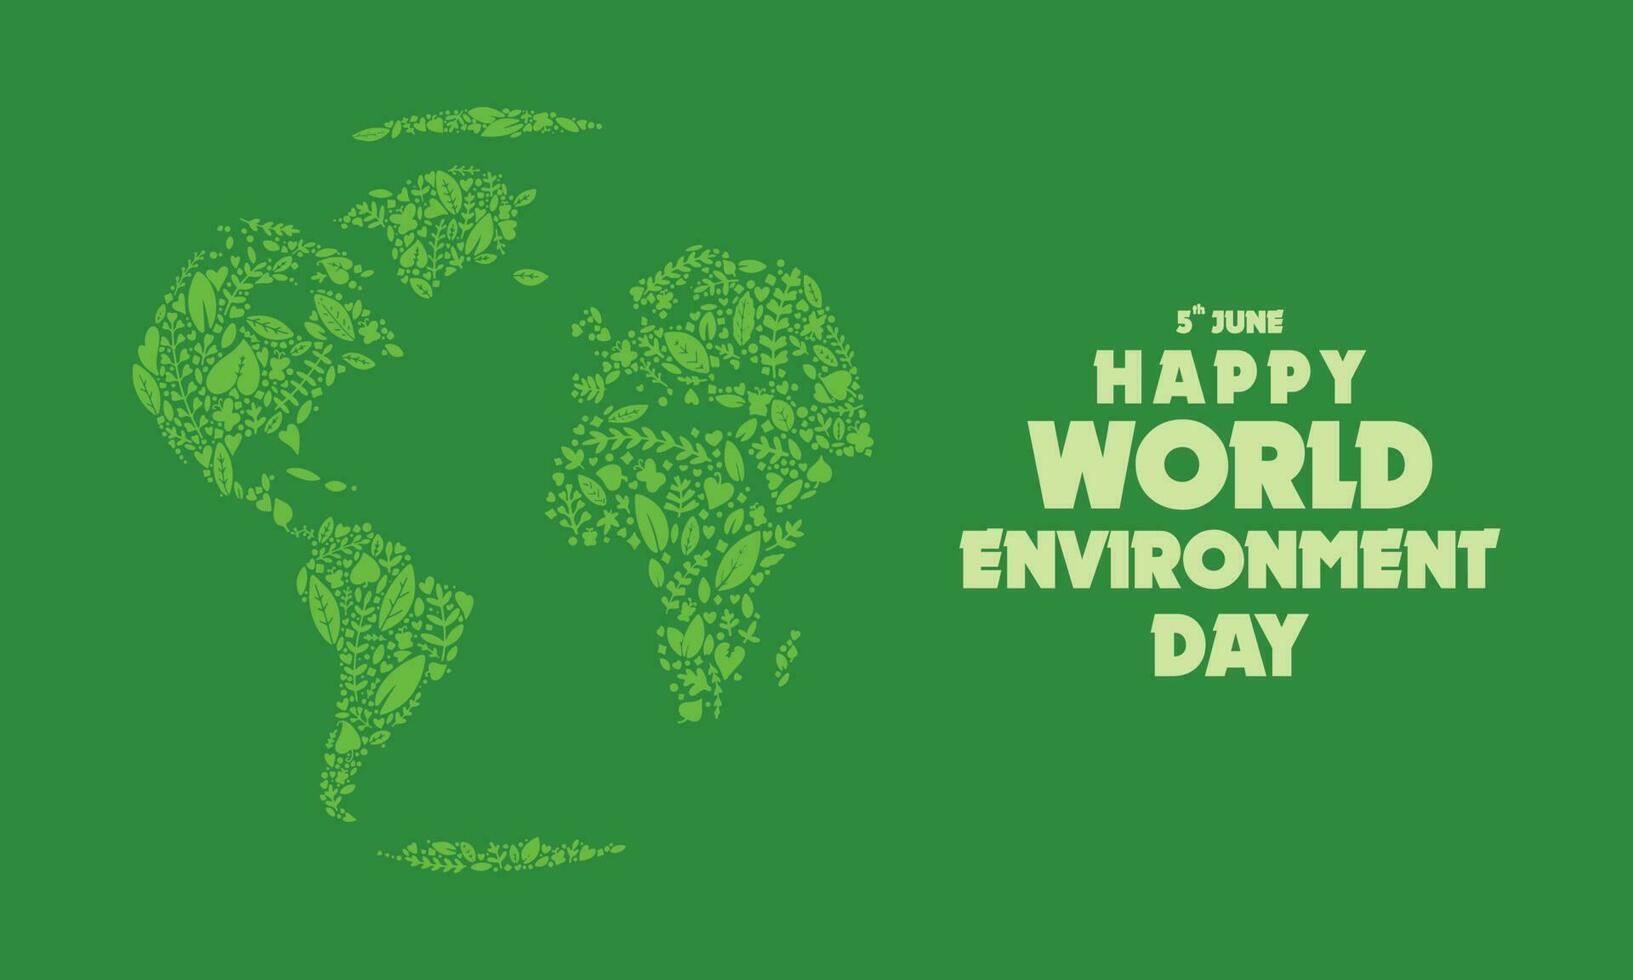 Happy World Environment Day Background vector